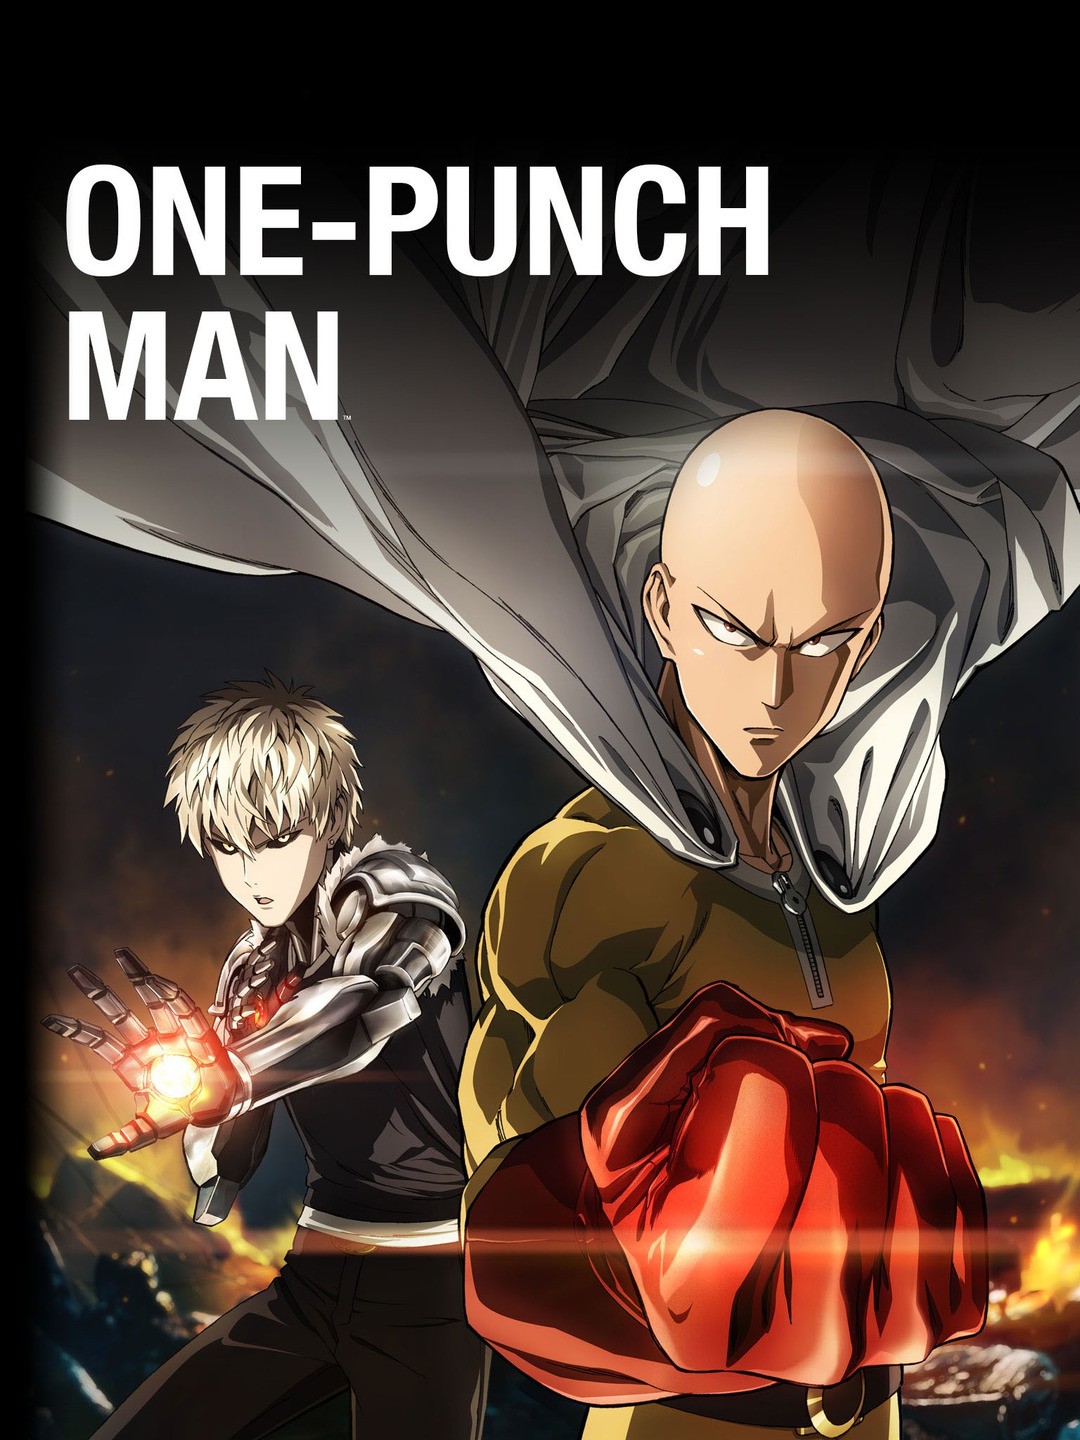 One-Punch Man Season 2 Review - IGN